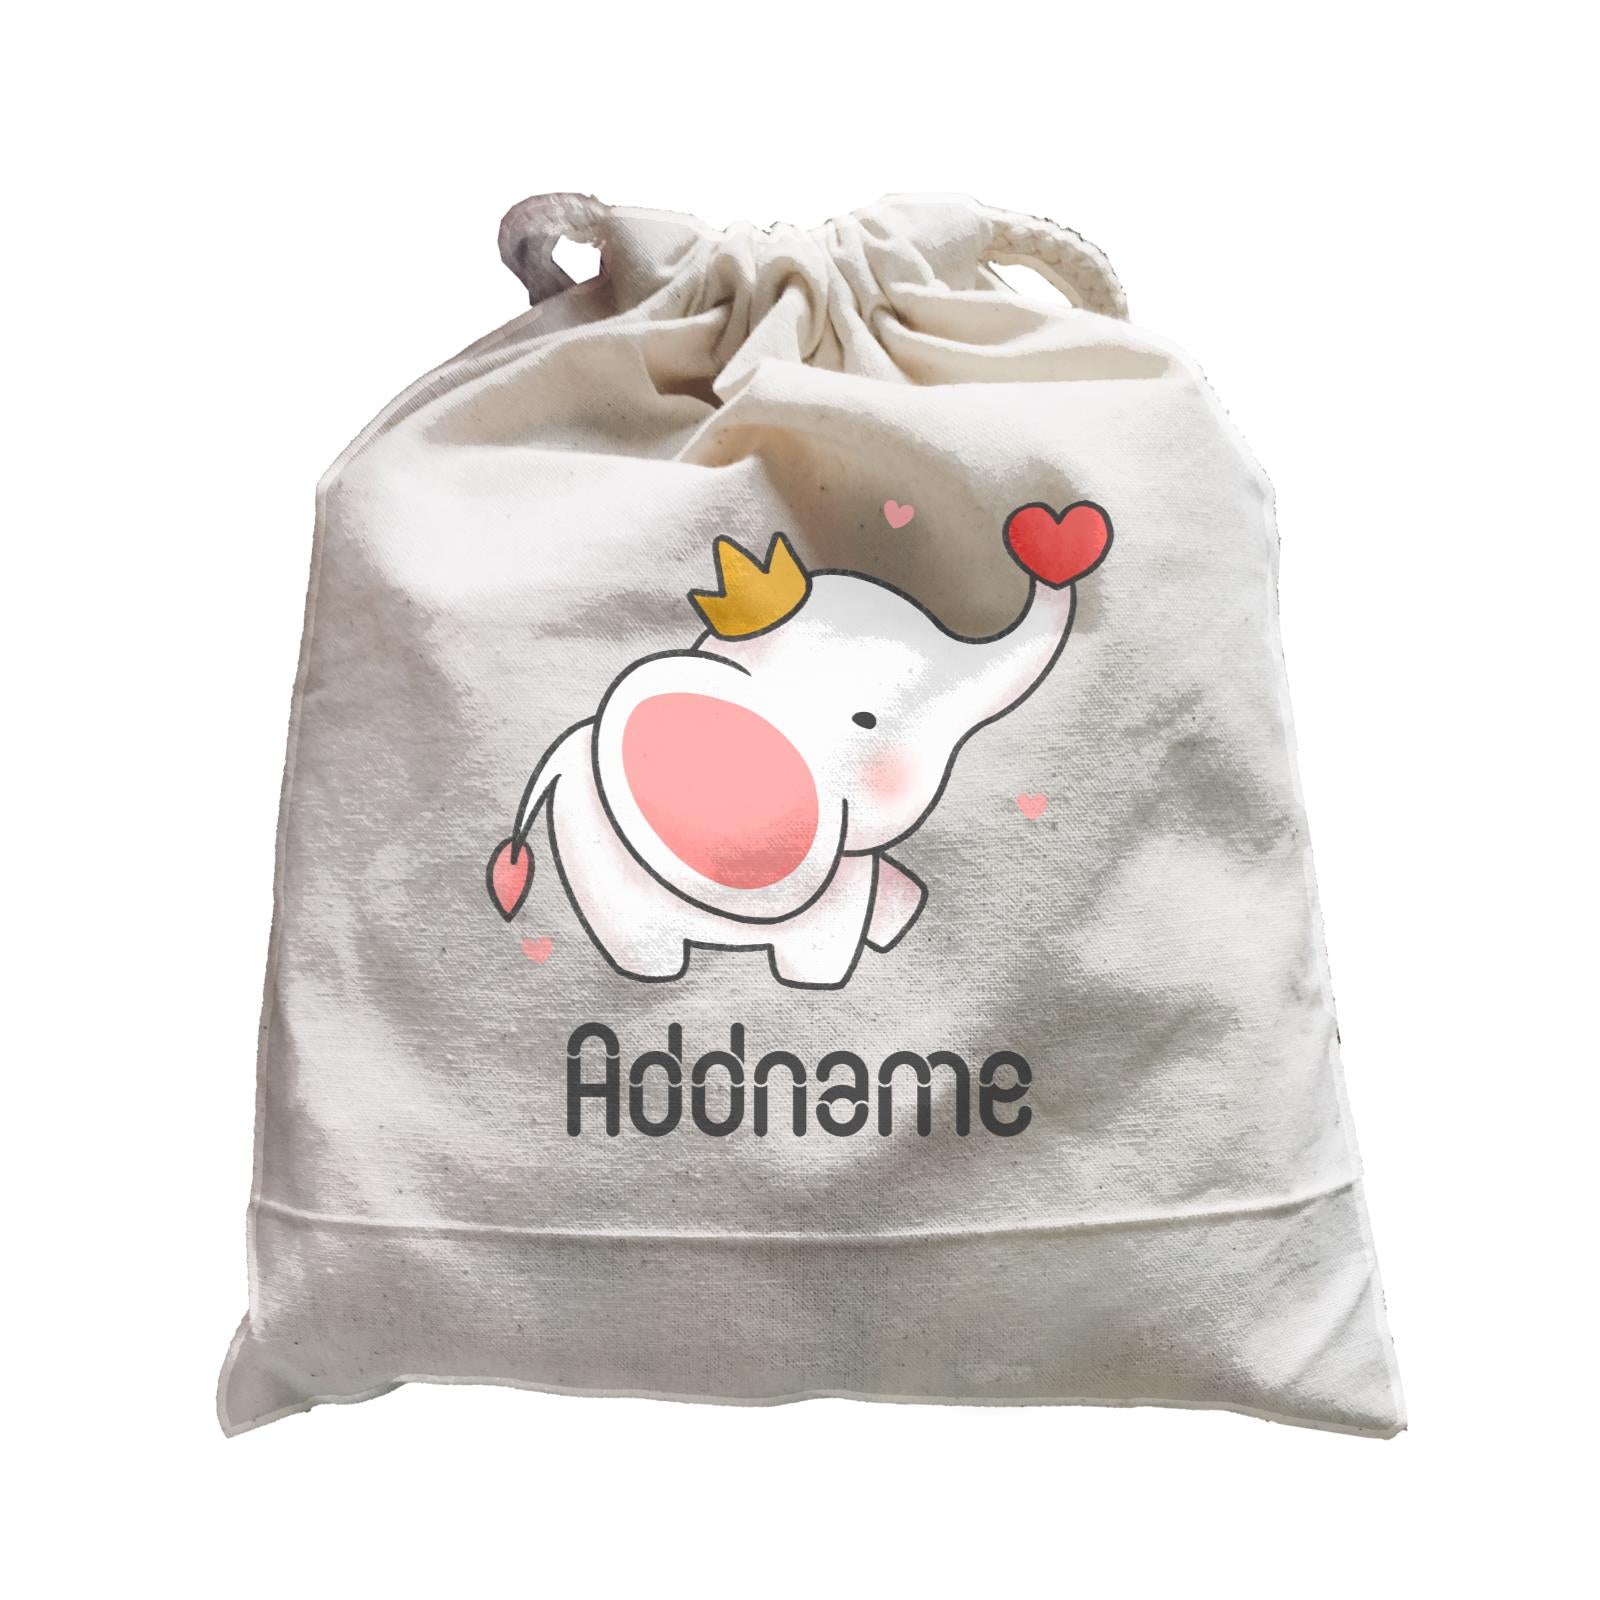 Cute Hand Drawn Style Baby Elephant with Heart and Crown Addname Satchel